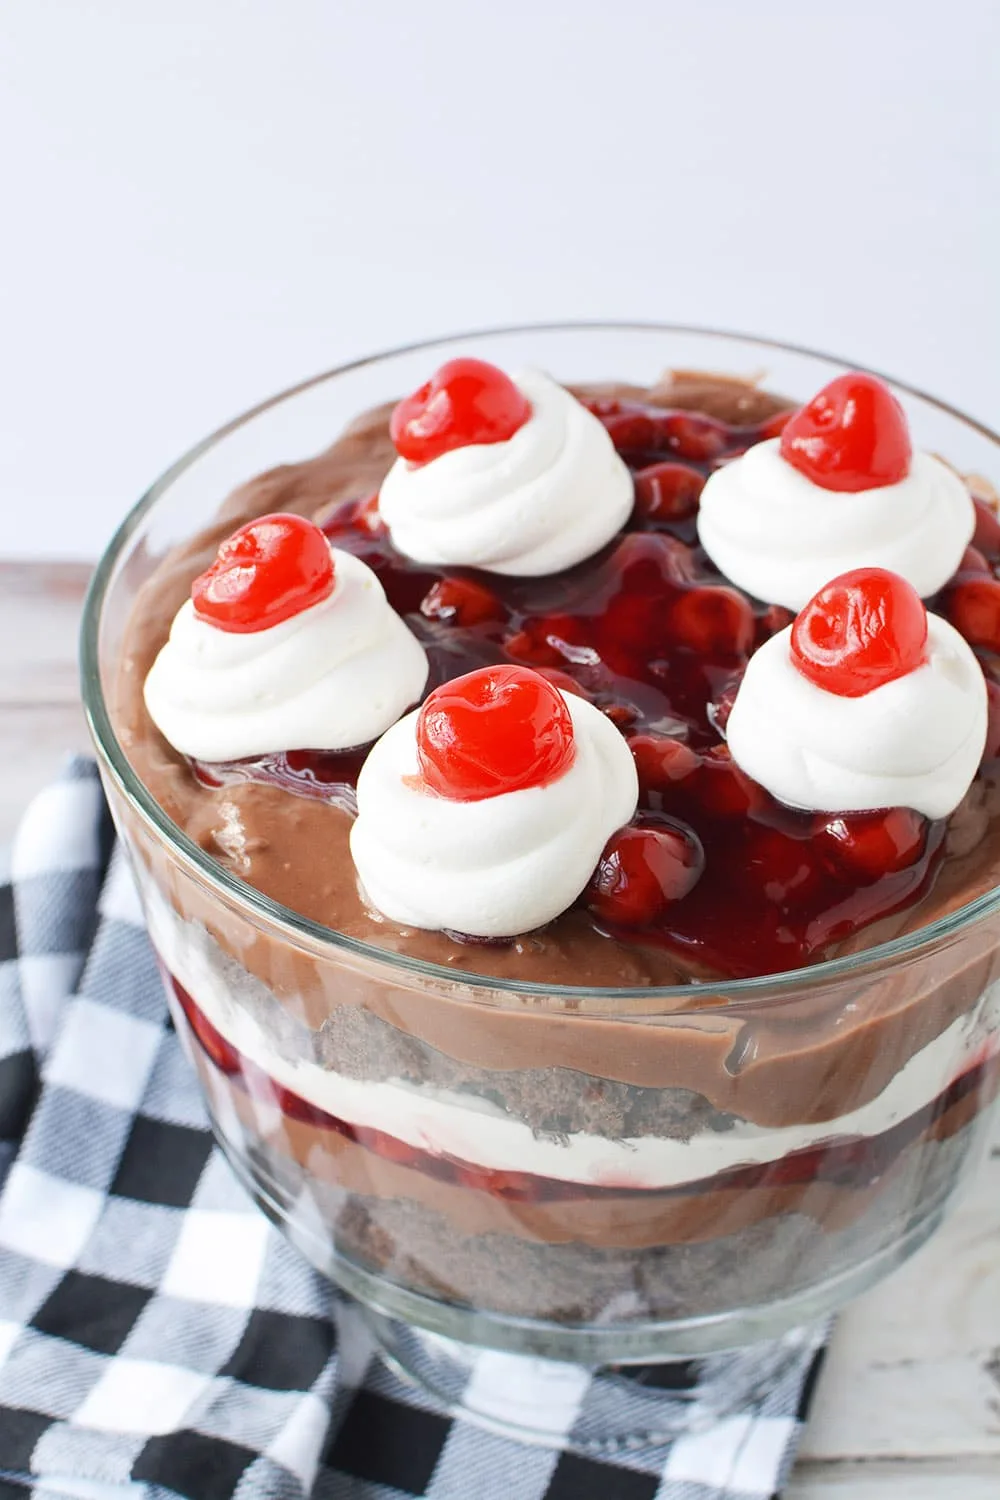 Chocolate cherry trifle in a bowl on a table with blue and white napkin.